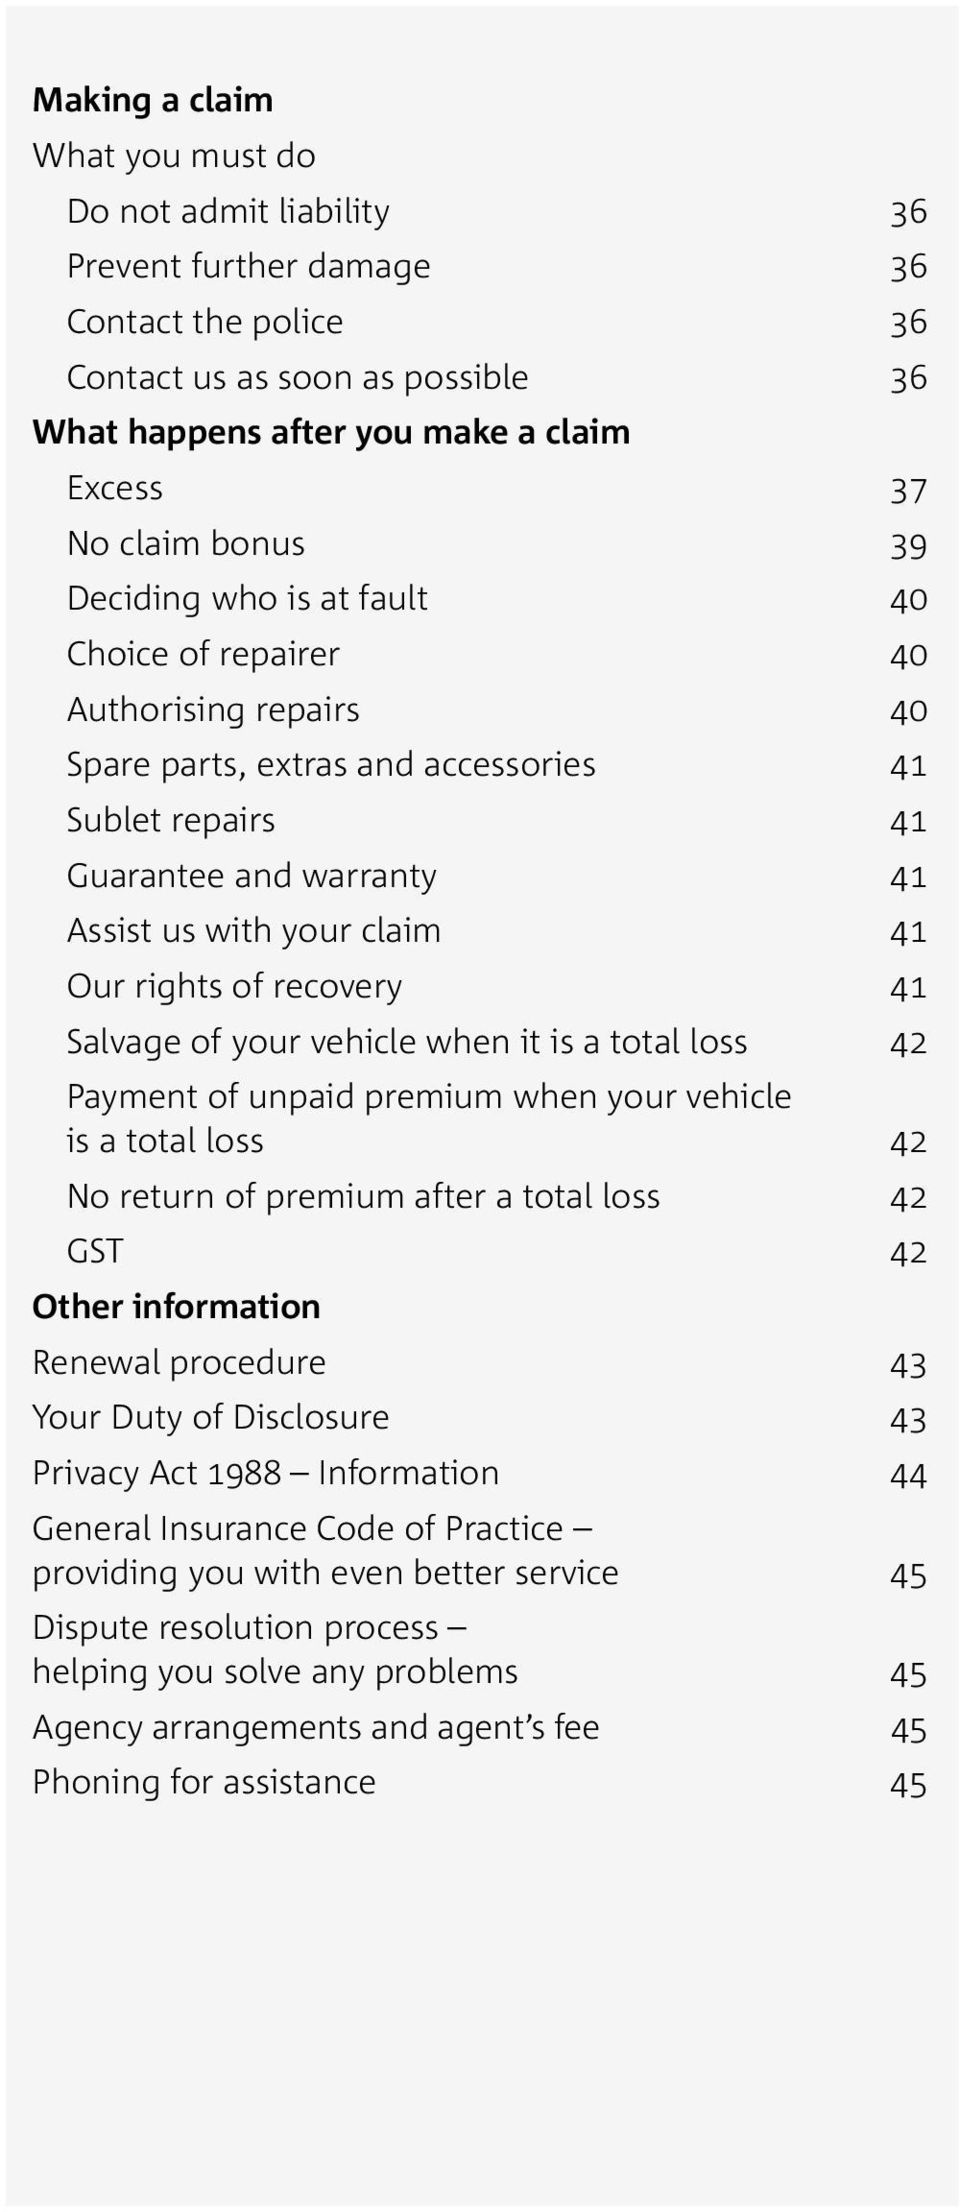 rights of recovery 41 Salvage of your vehicle when it is a total loss 42 Payment of unpaid premium when your vehicle is a total loss 42 No return of premium after a total loss 42 GST 42 Other